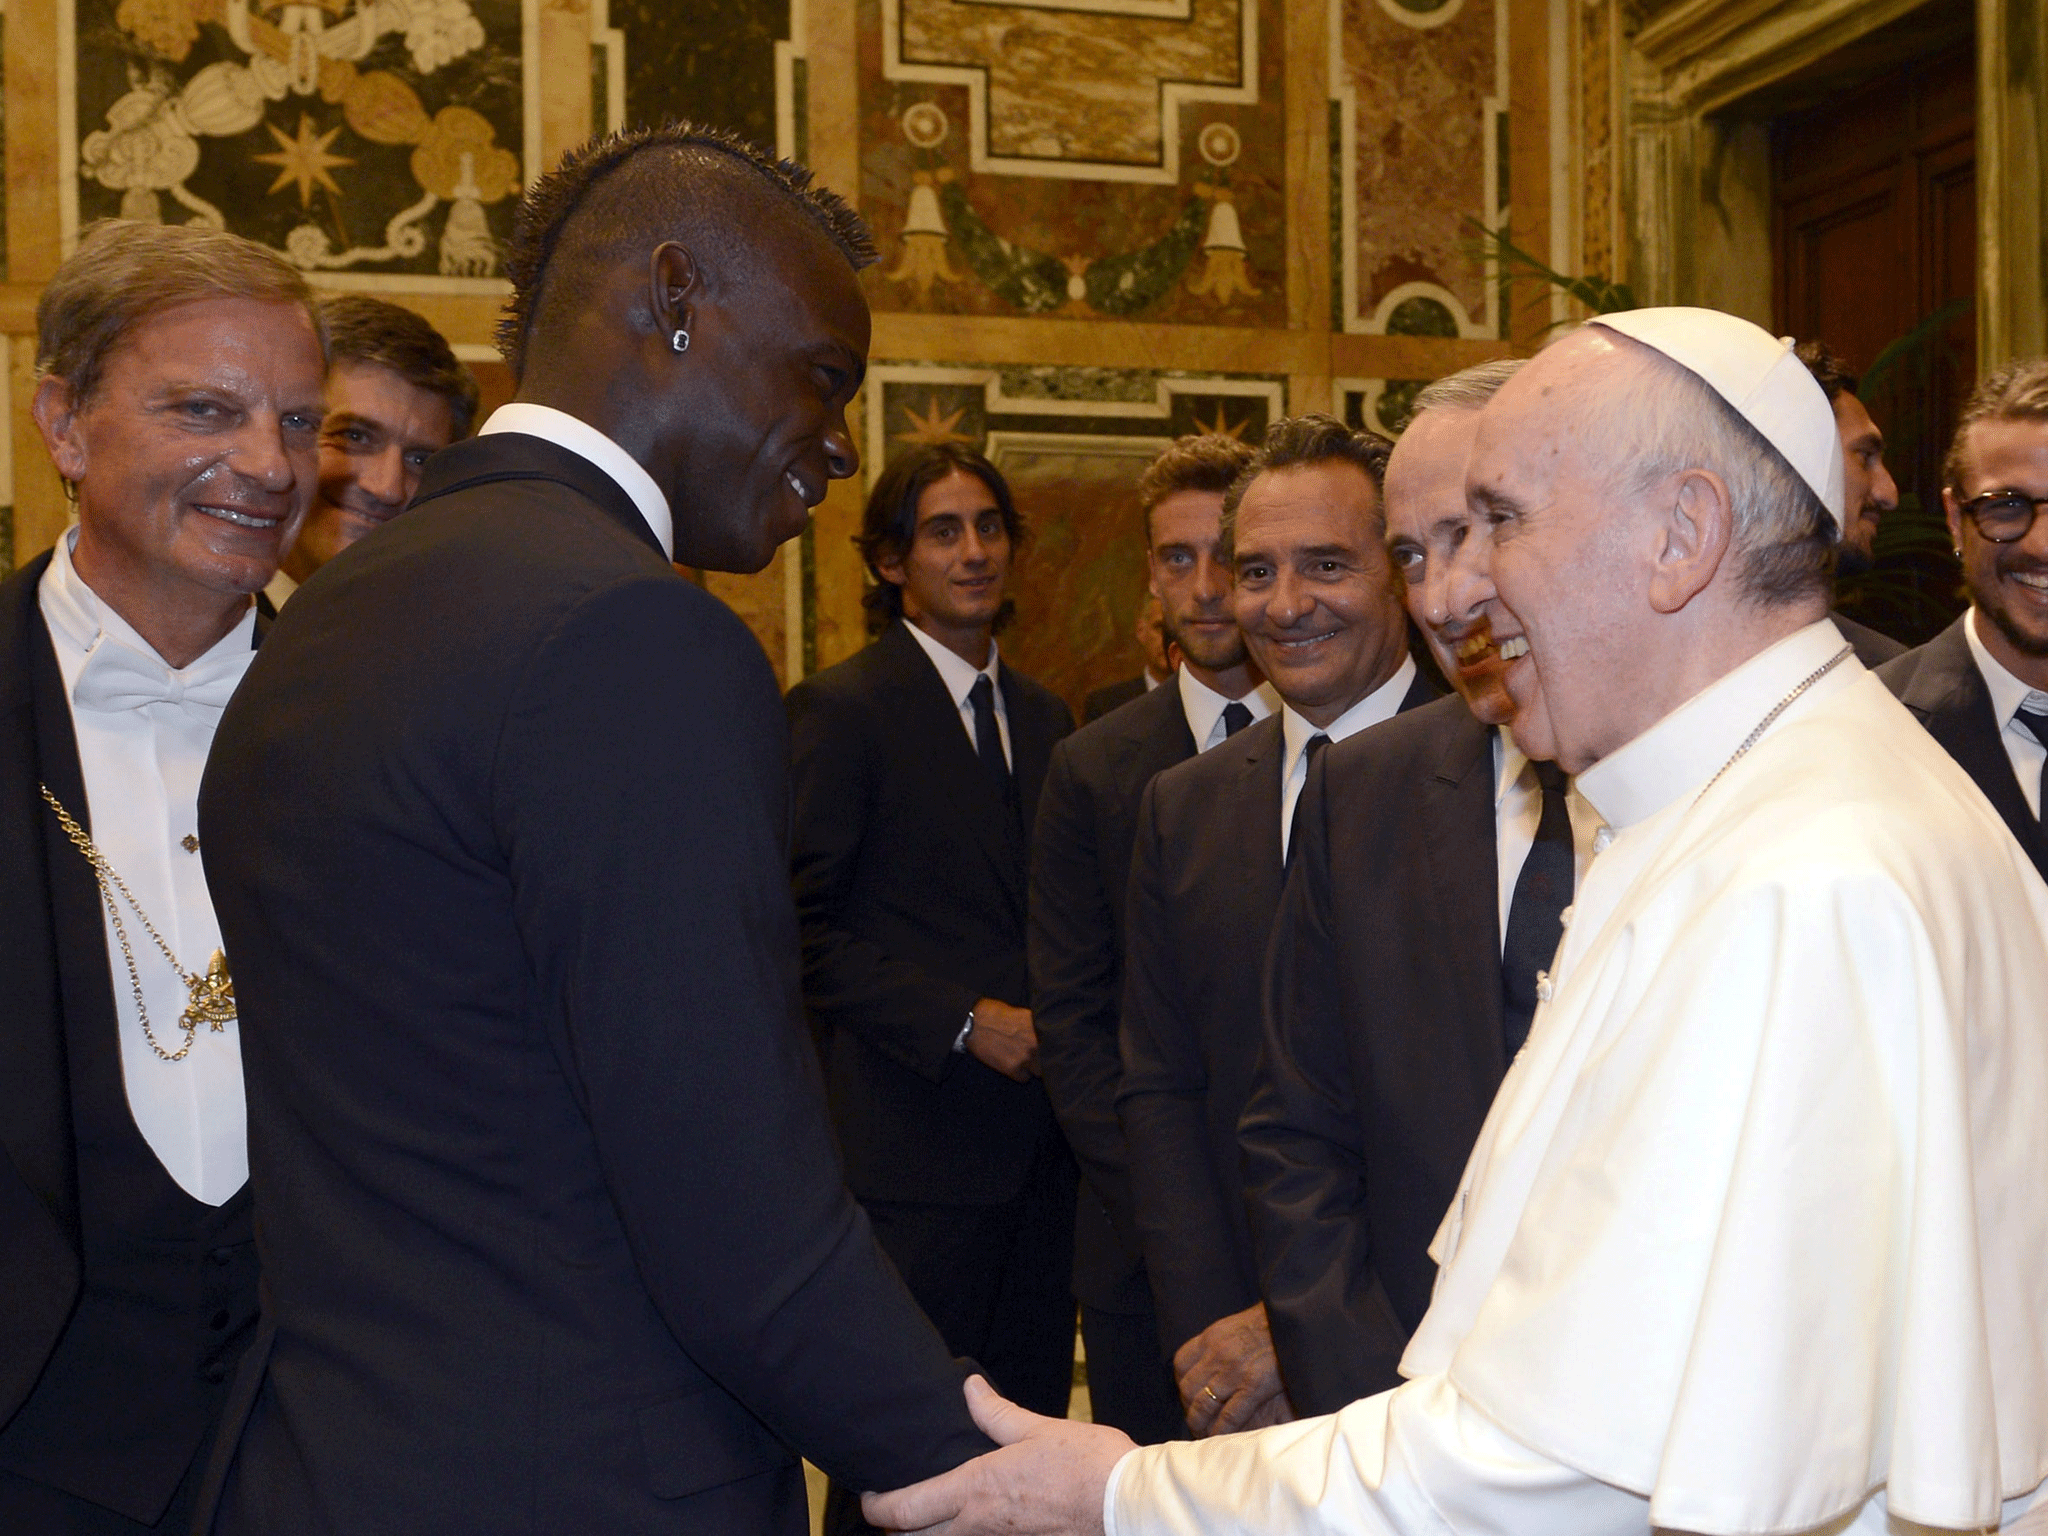 Mario Balotelli meets the Pope in Rome with the rest of the Italy squad